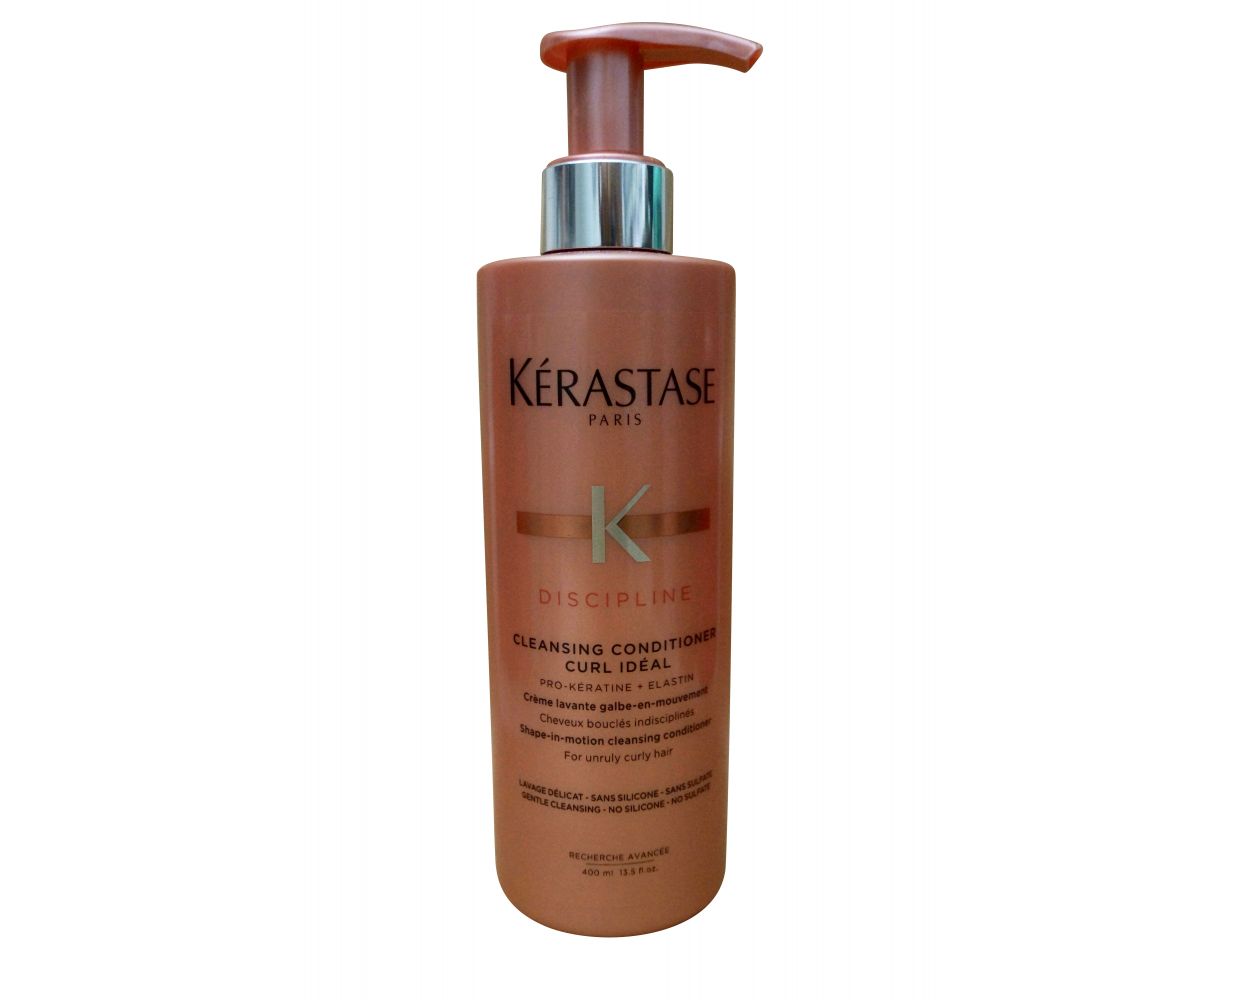 Kerastase Discipline Curl Ideal Cleansing Conditioner Frizzy & Hair | Beautyvice.com